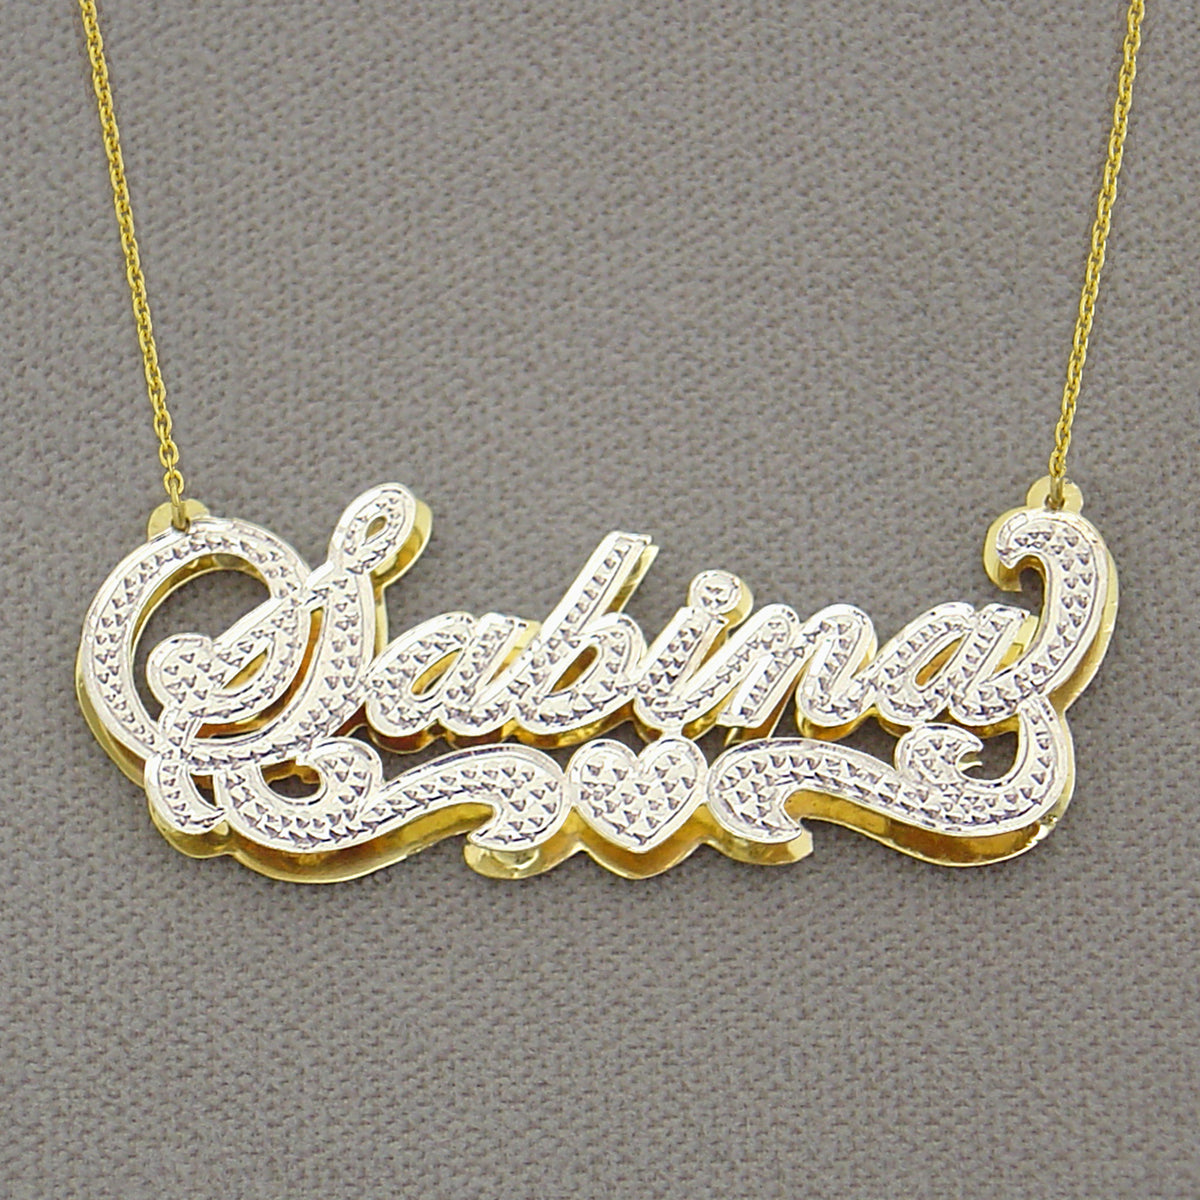 Personalized Diamond Jewelry 3D Double Plates Name Pendant Charm Iced Out Heart 2 Tone ND26